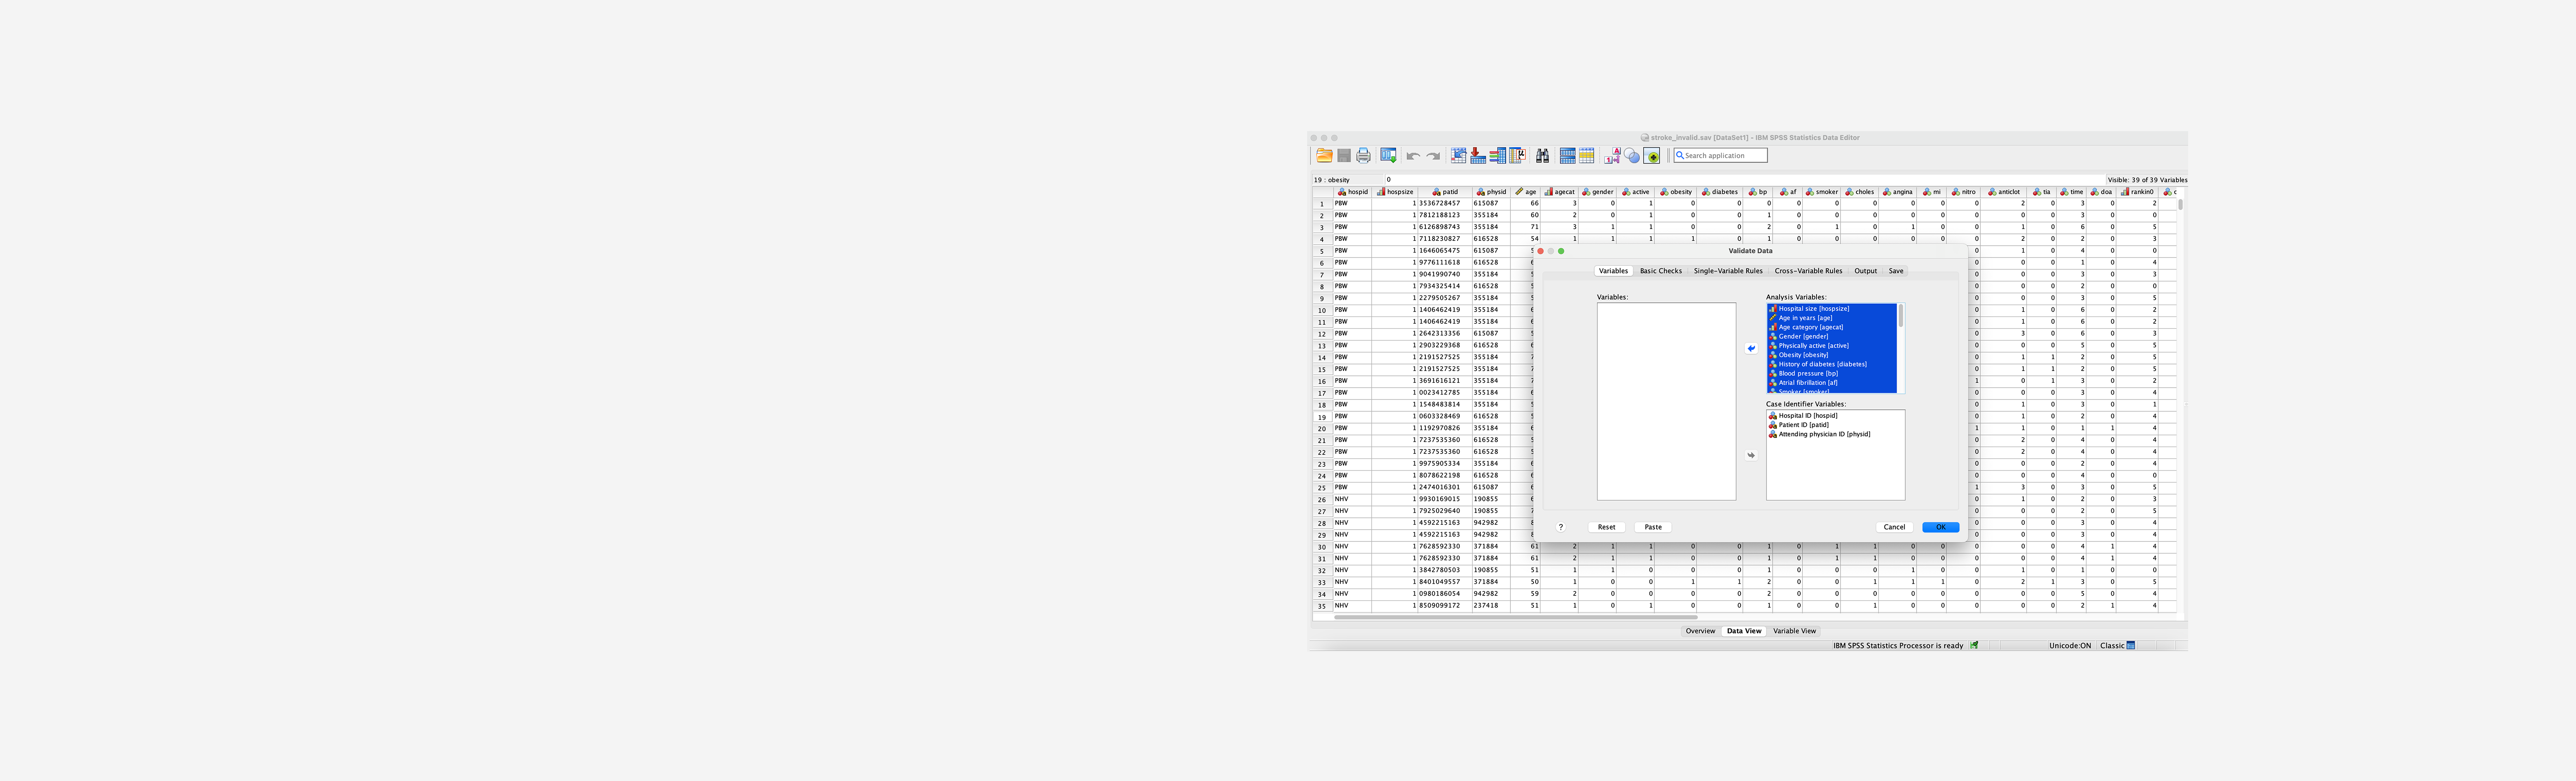 Illustration shows SPSS product screen, configure visualization options